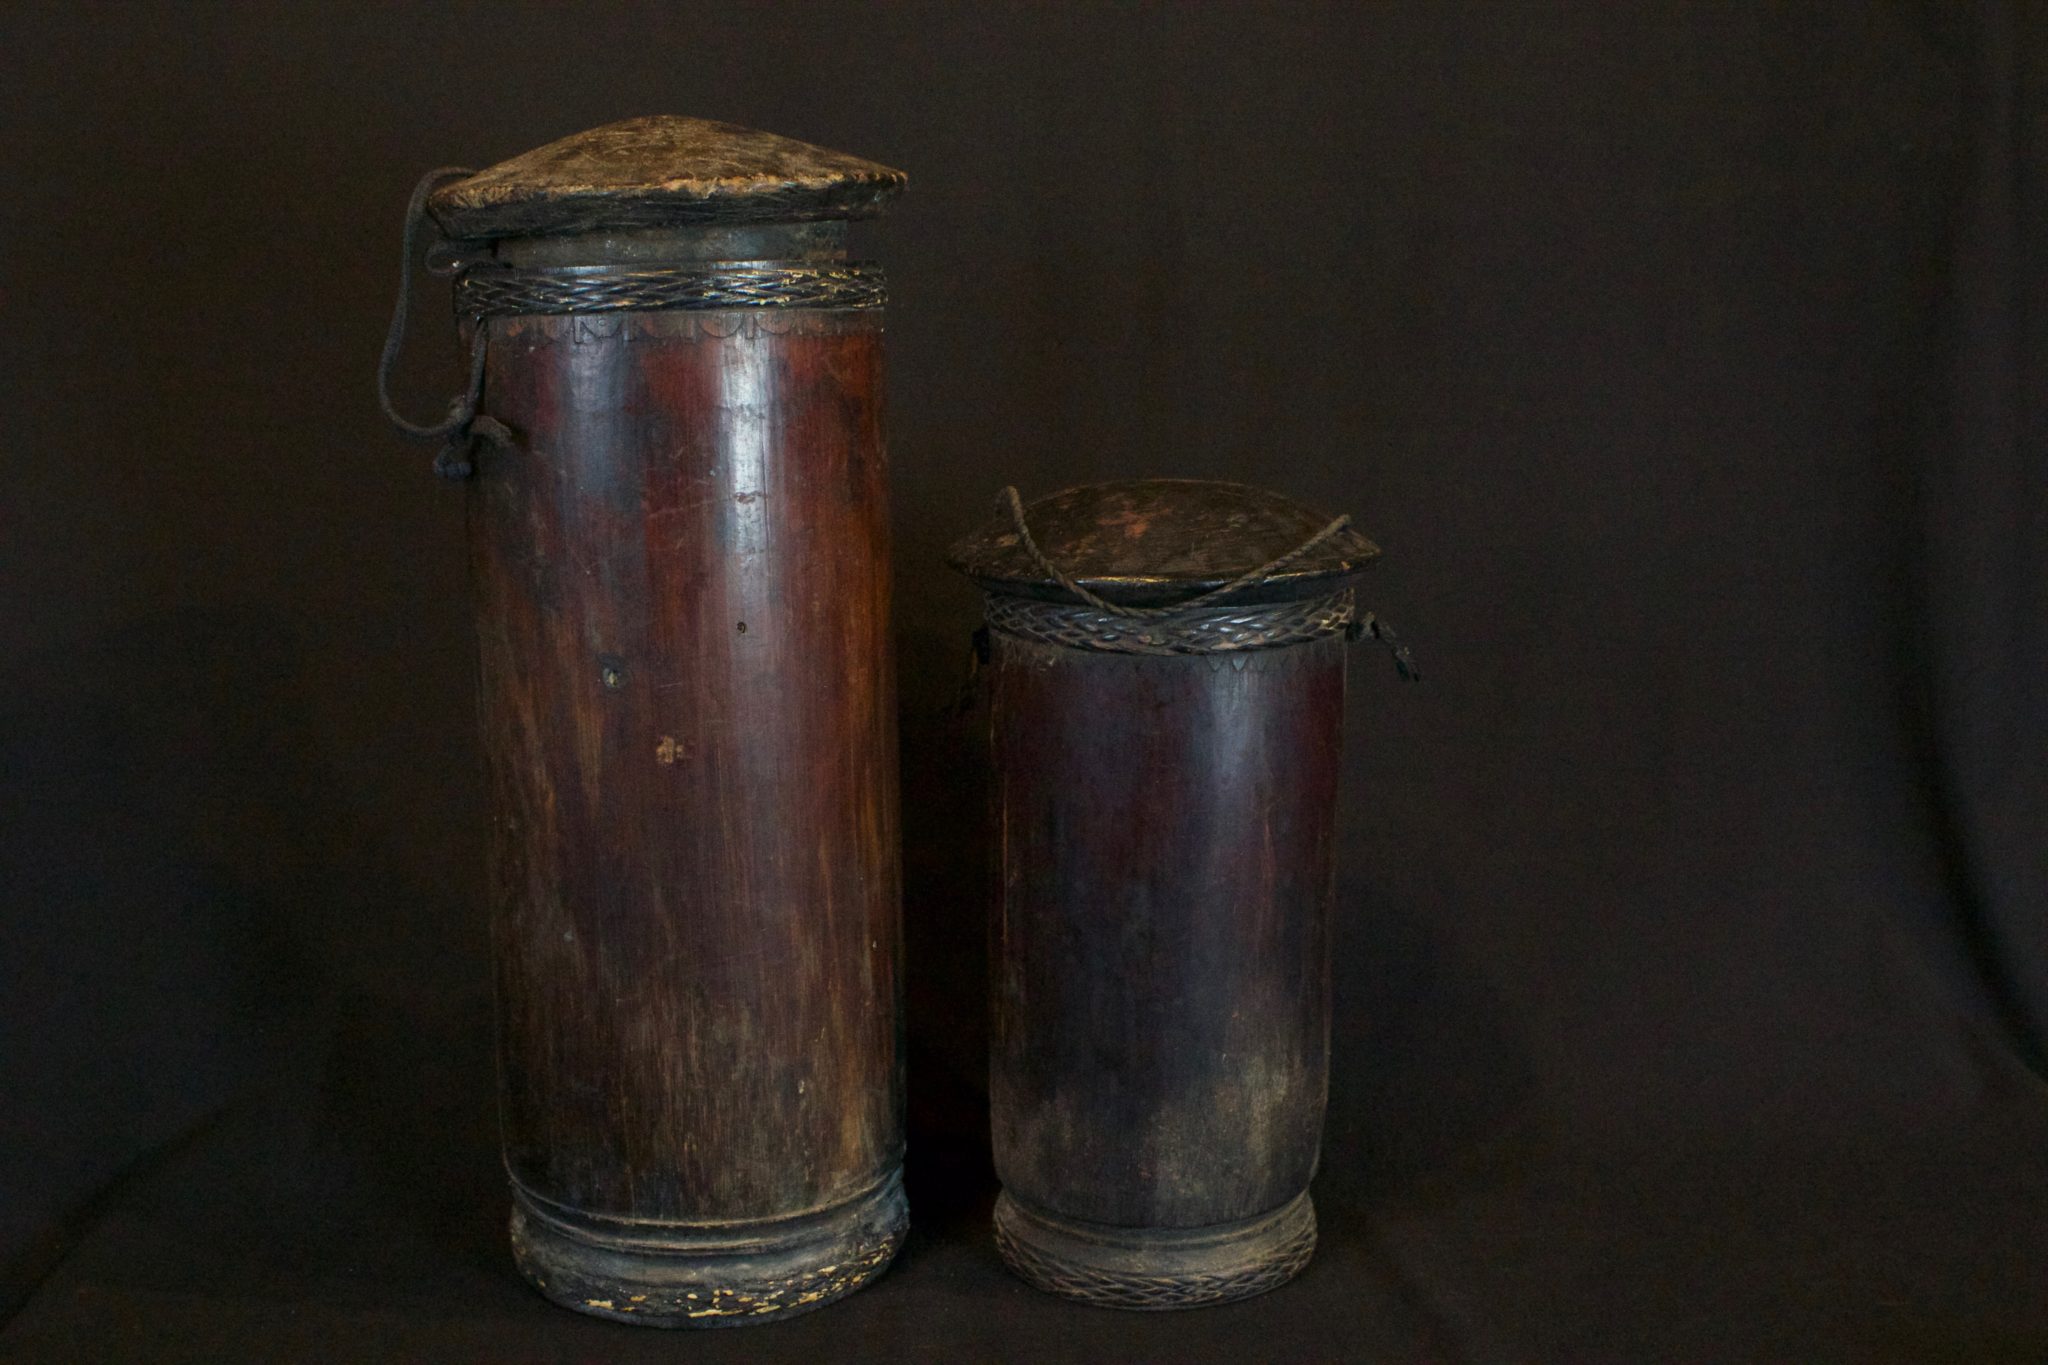 Shaman's Medicine Container, Sumatra, Indonesia, Batak tribe, Early 20th c, Wood, rattan, fiber cord, pigmented. Hung in a shaman’s home to store medicines. (left/large - 17” x 7 ¼” x 7 ¼”, $475.); (right/small -12” x 6 ¼” 6 ¼”, $375.)